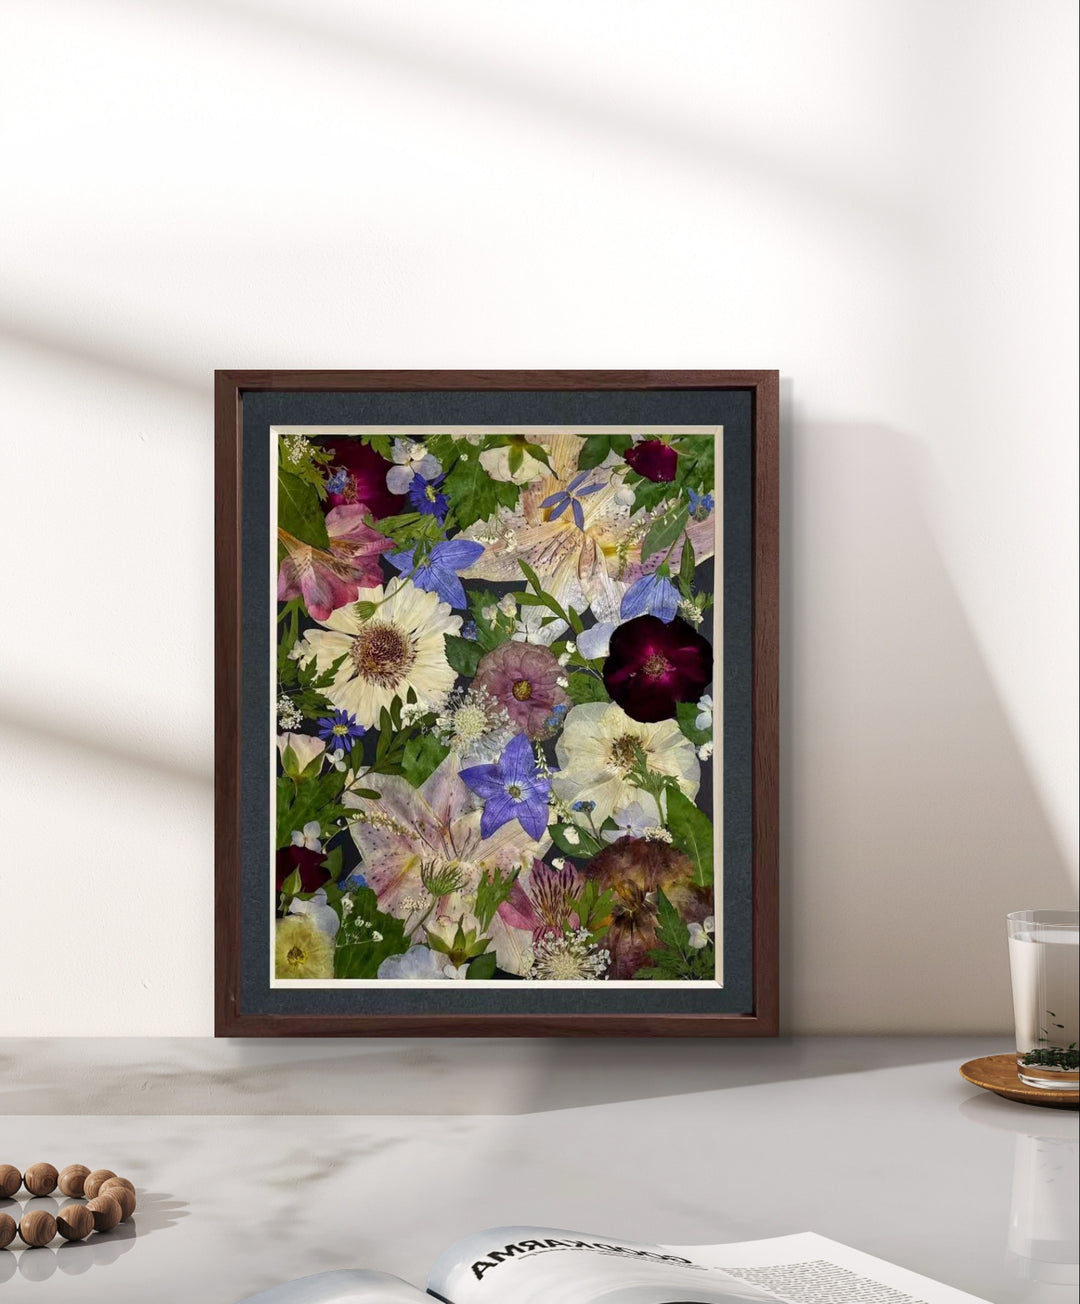 Sparkle stars theme 11 inches width 12.5 inches height pressed flower frame art stands on the table.